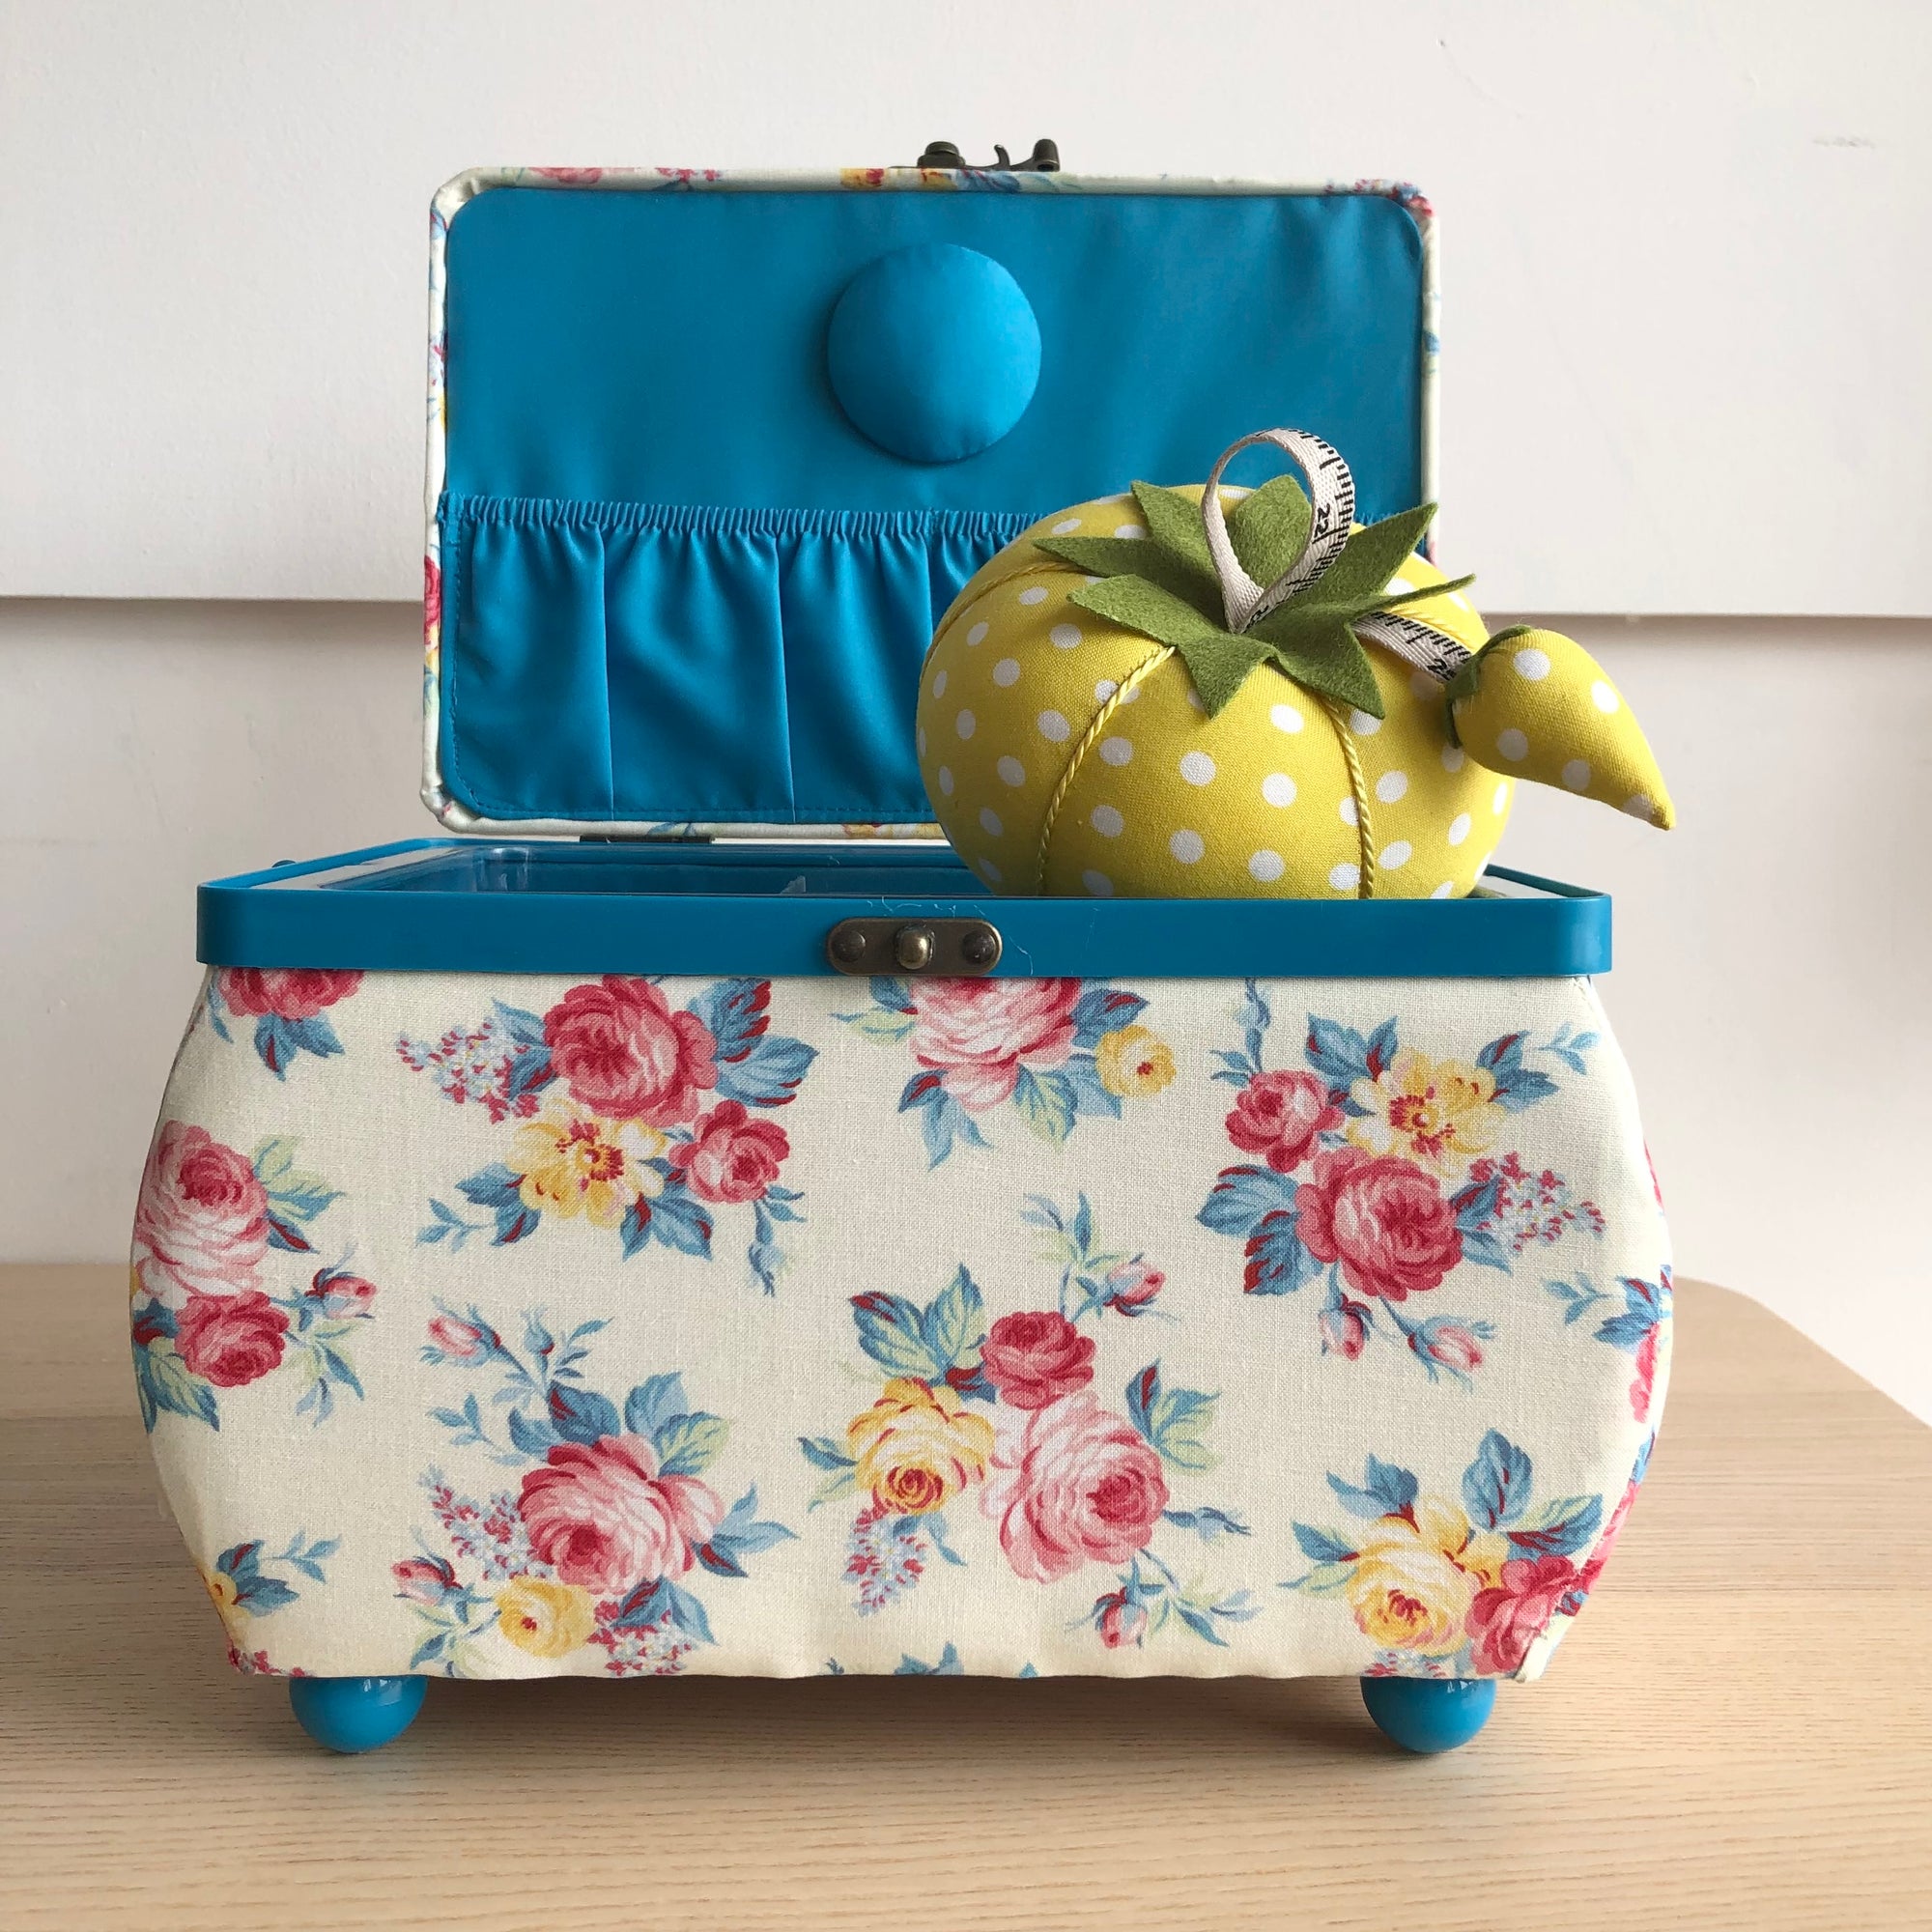 Floral Sewing Basket with Pin Cushion